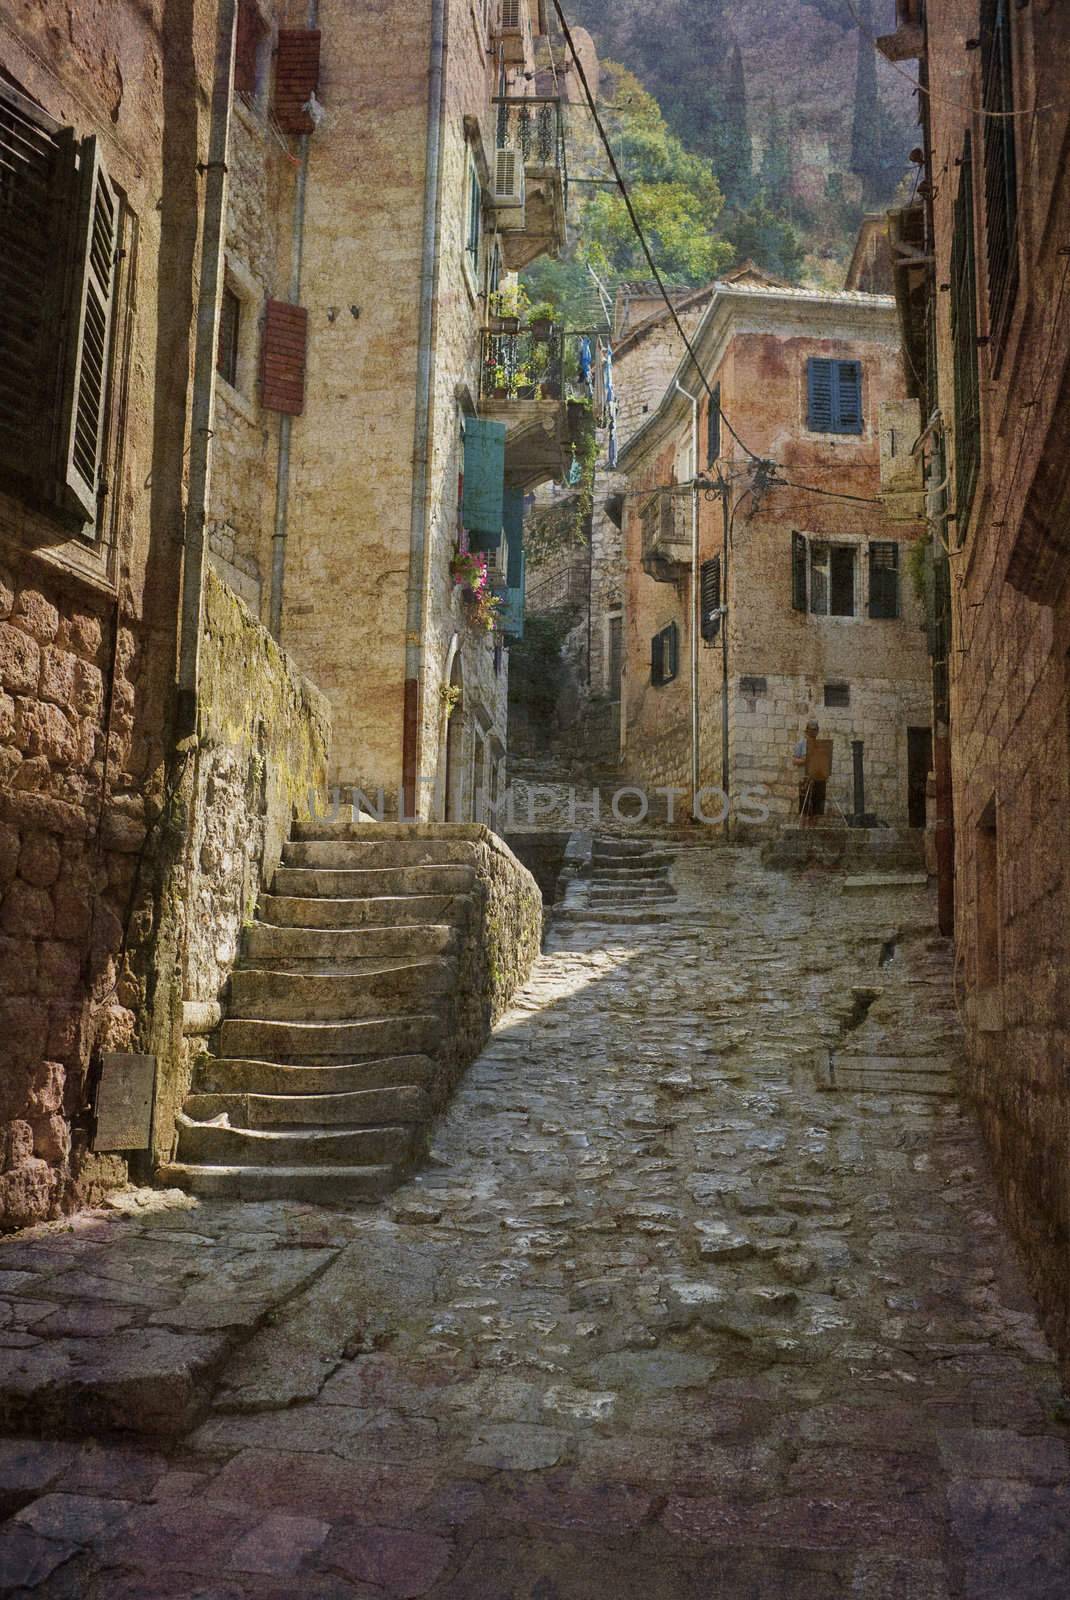 Picturesque alley Kotor. Postcard from Montenegro, Europe. Several of my photos worked together to reflect age and time.